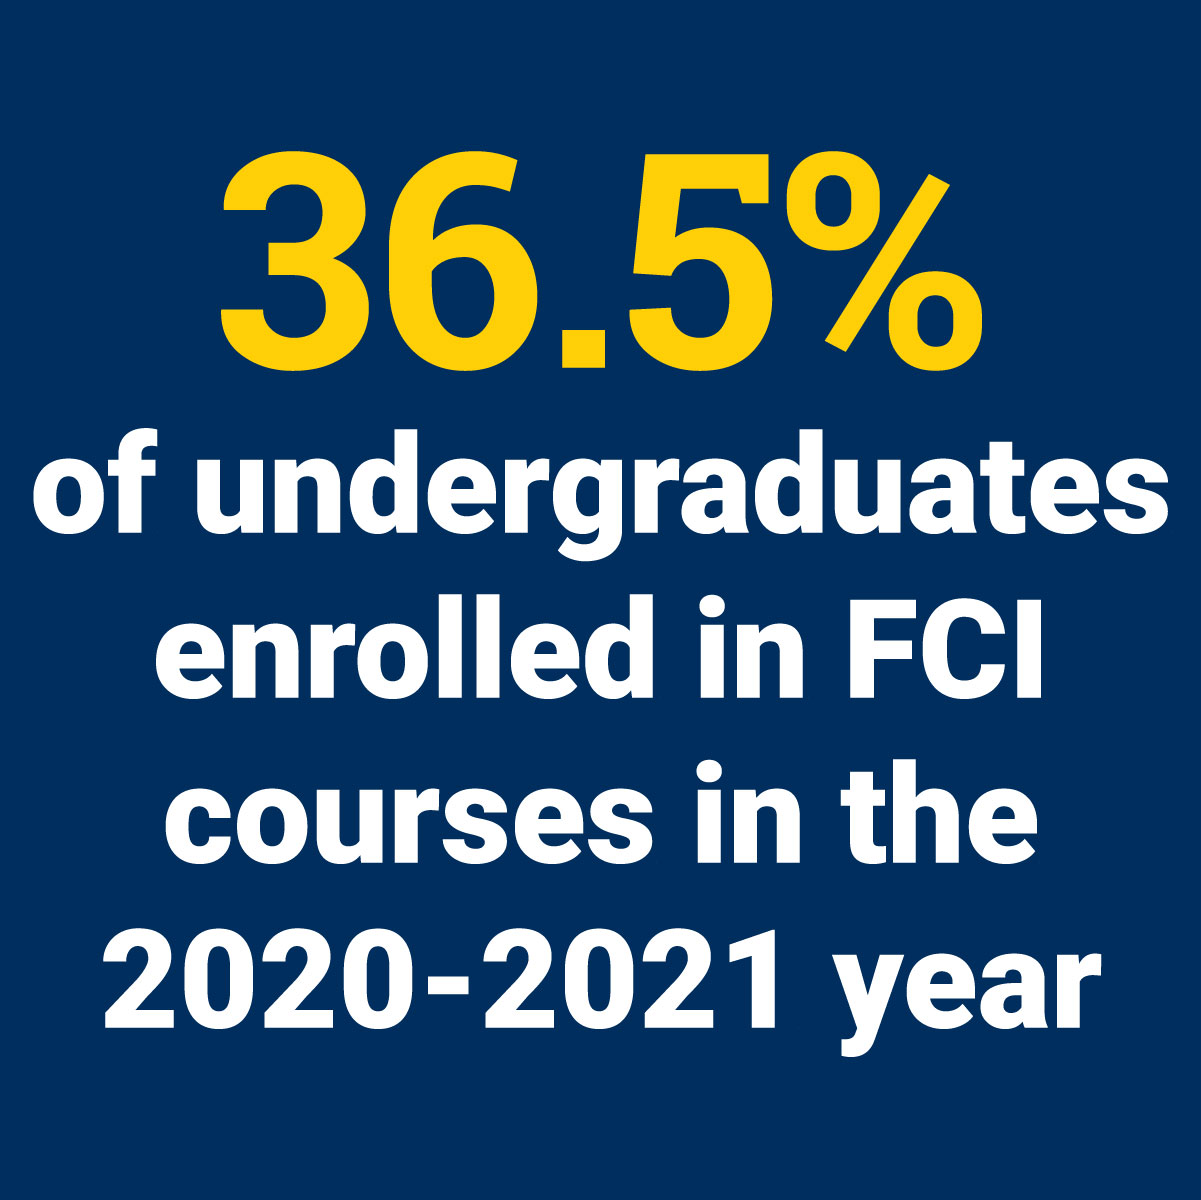 36.5% of undergraduates enrolled in FCI courses in the 2020-2021 year